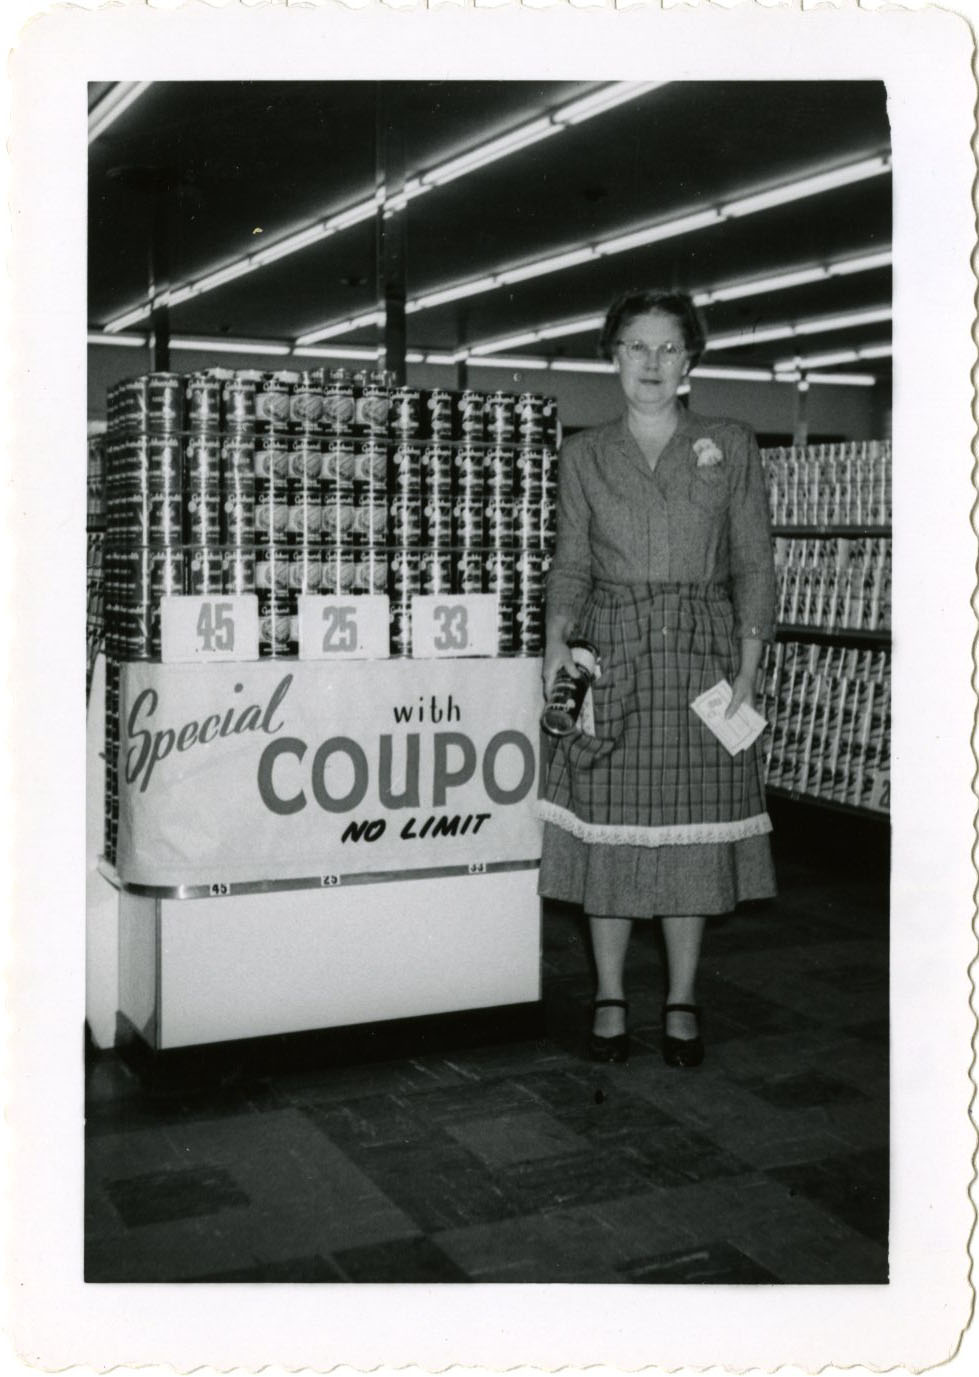 Female standing beside coupon sign and store display